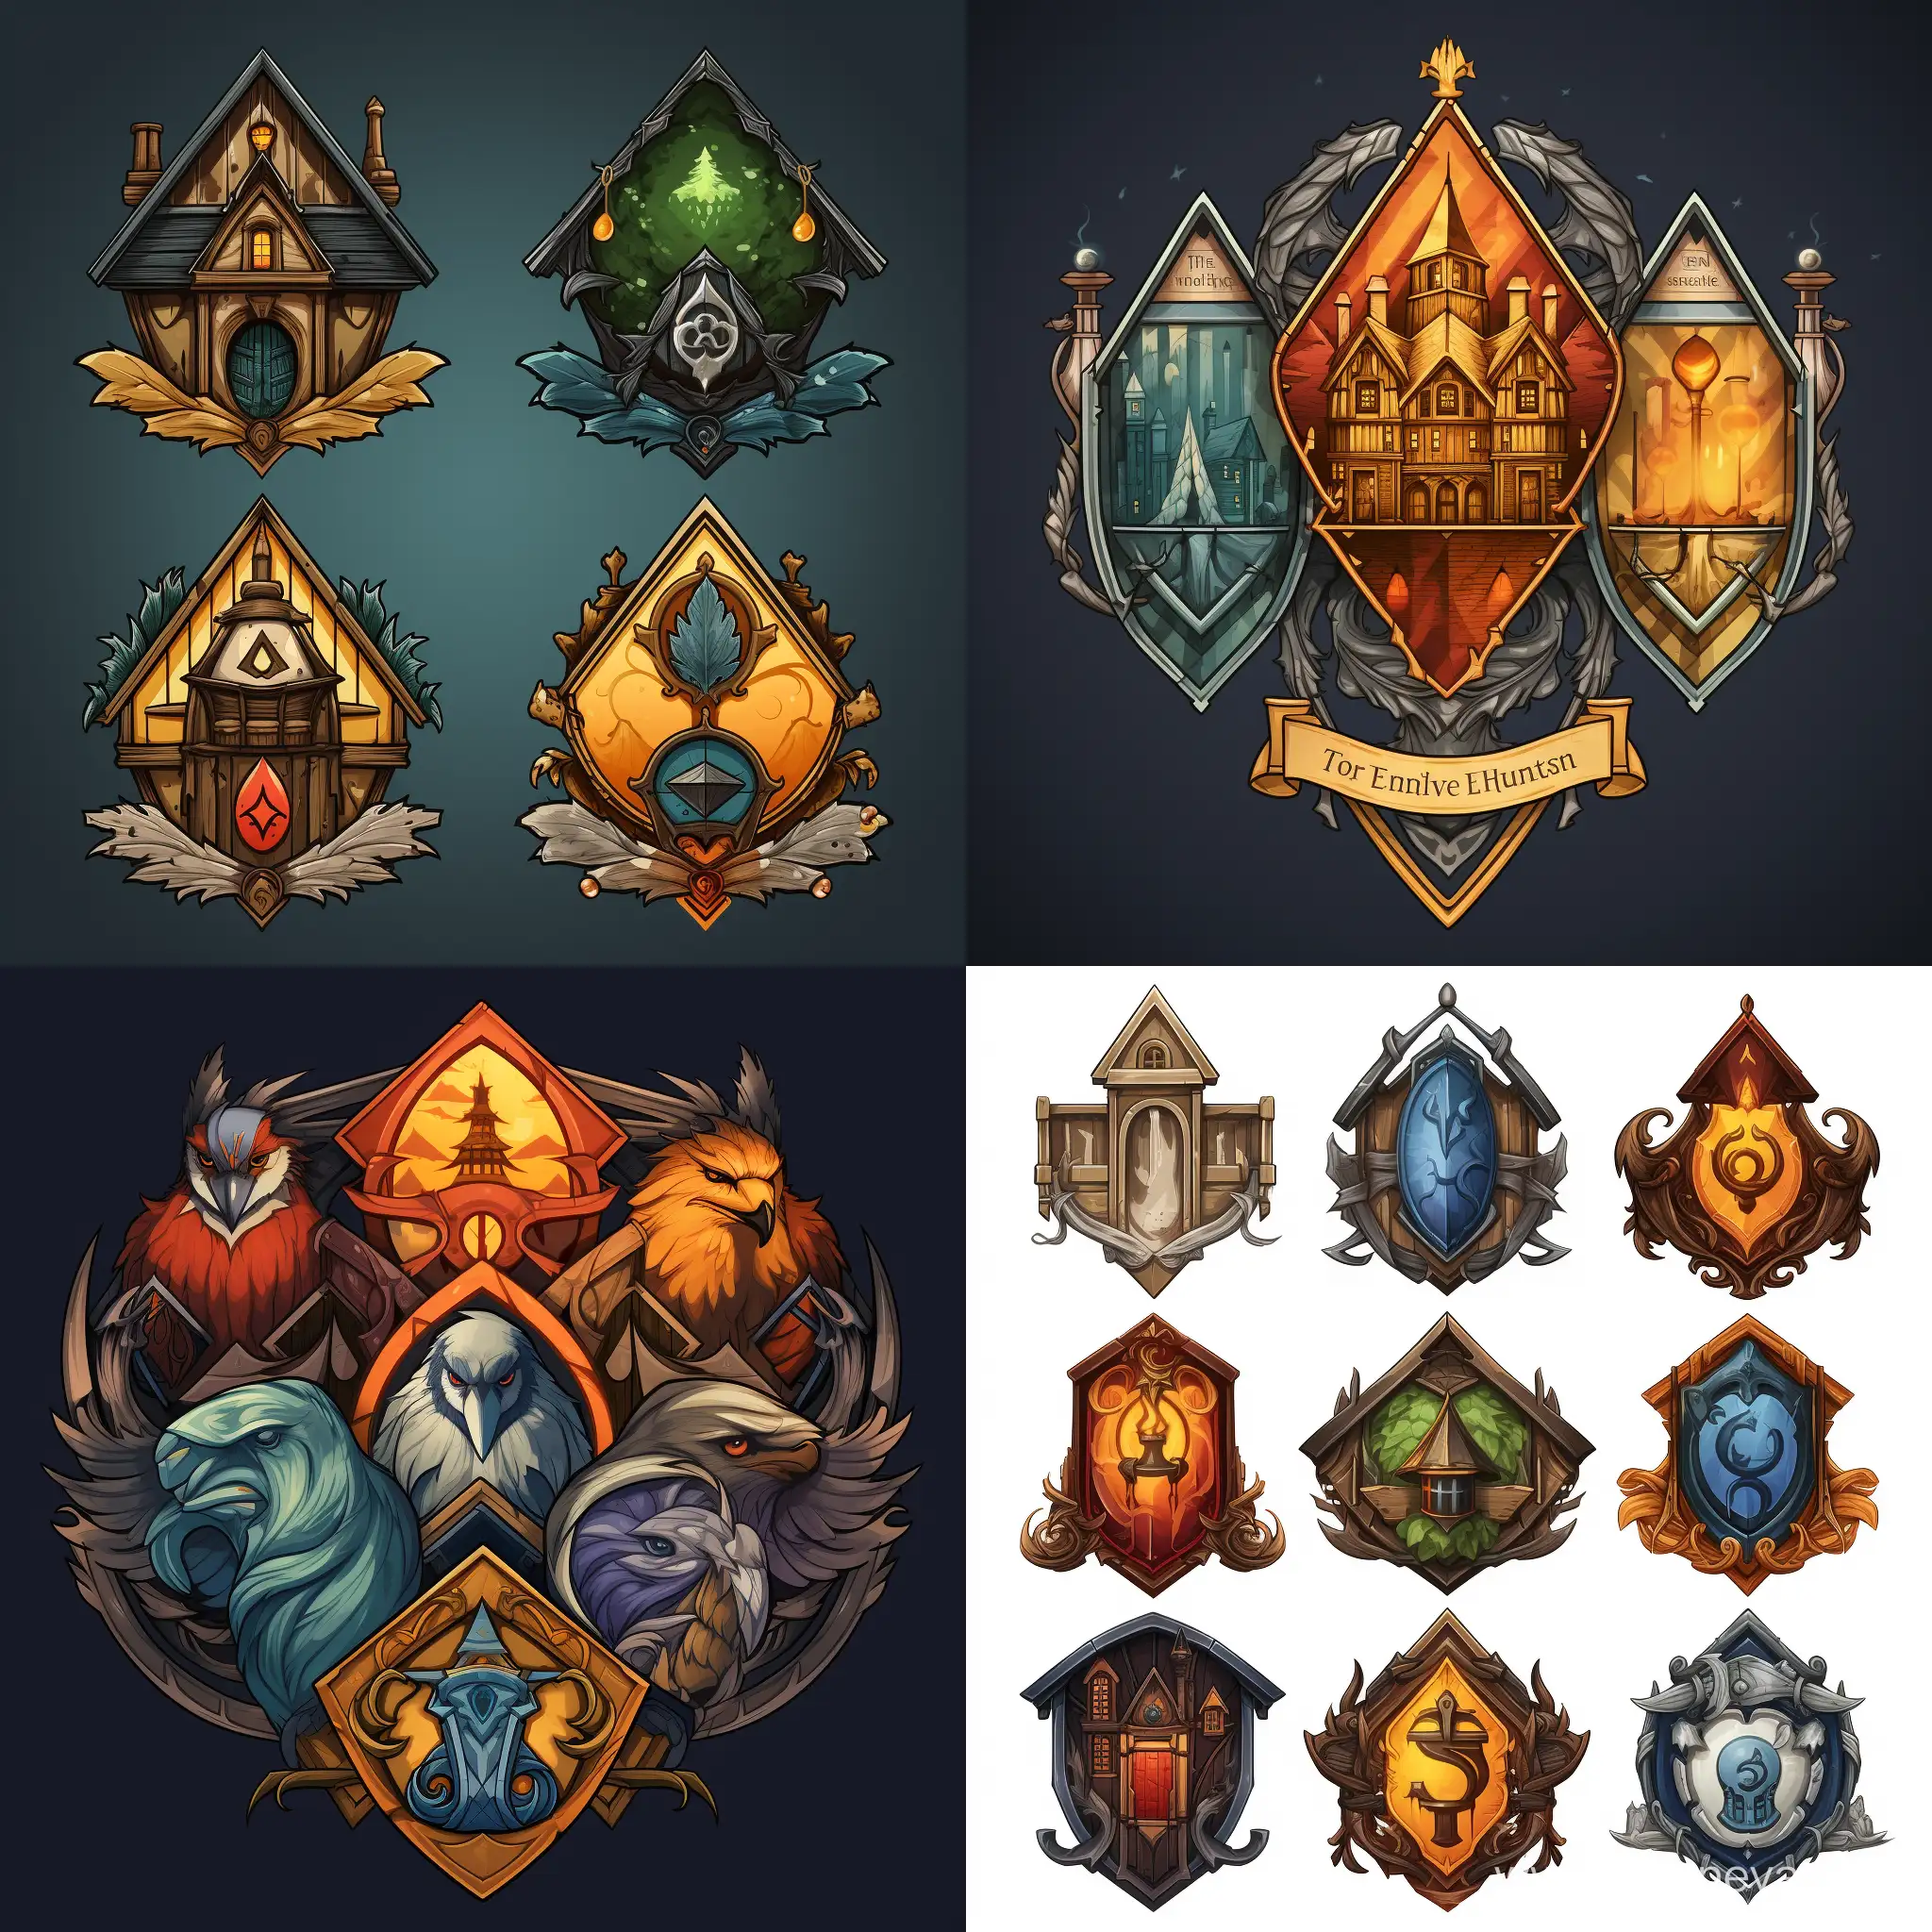 Generate House emblems similar to the harry potter houses 
